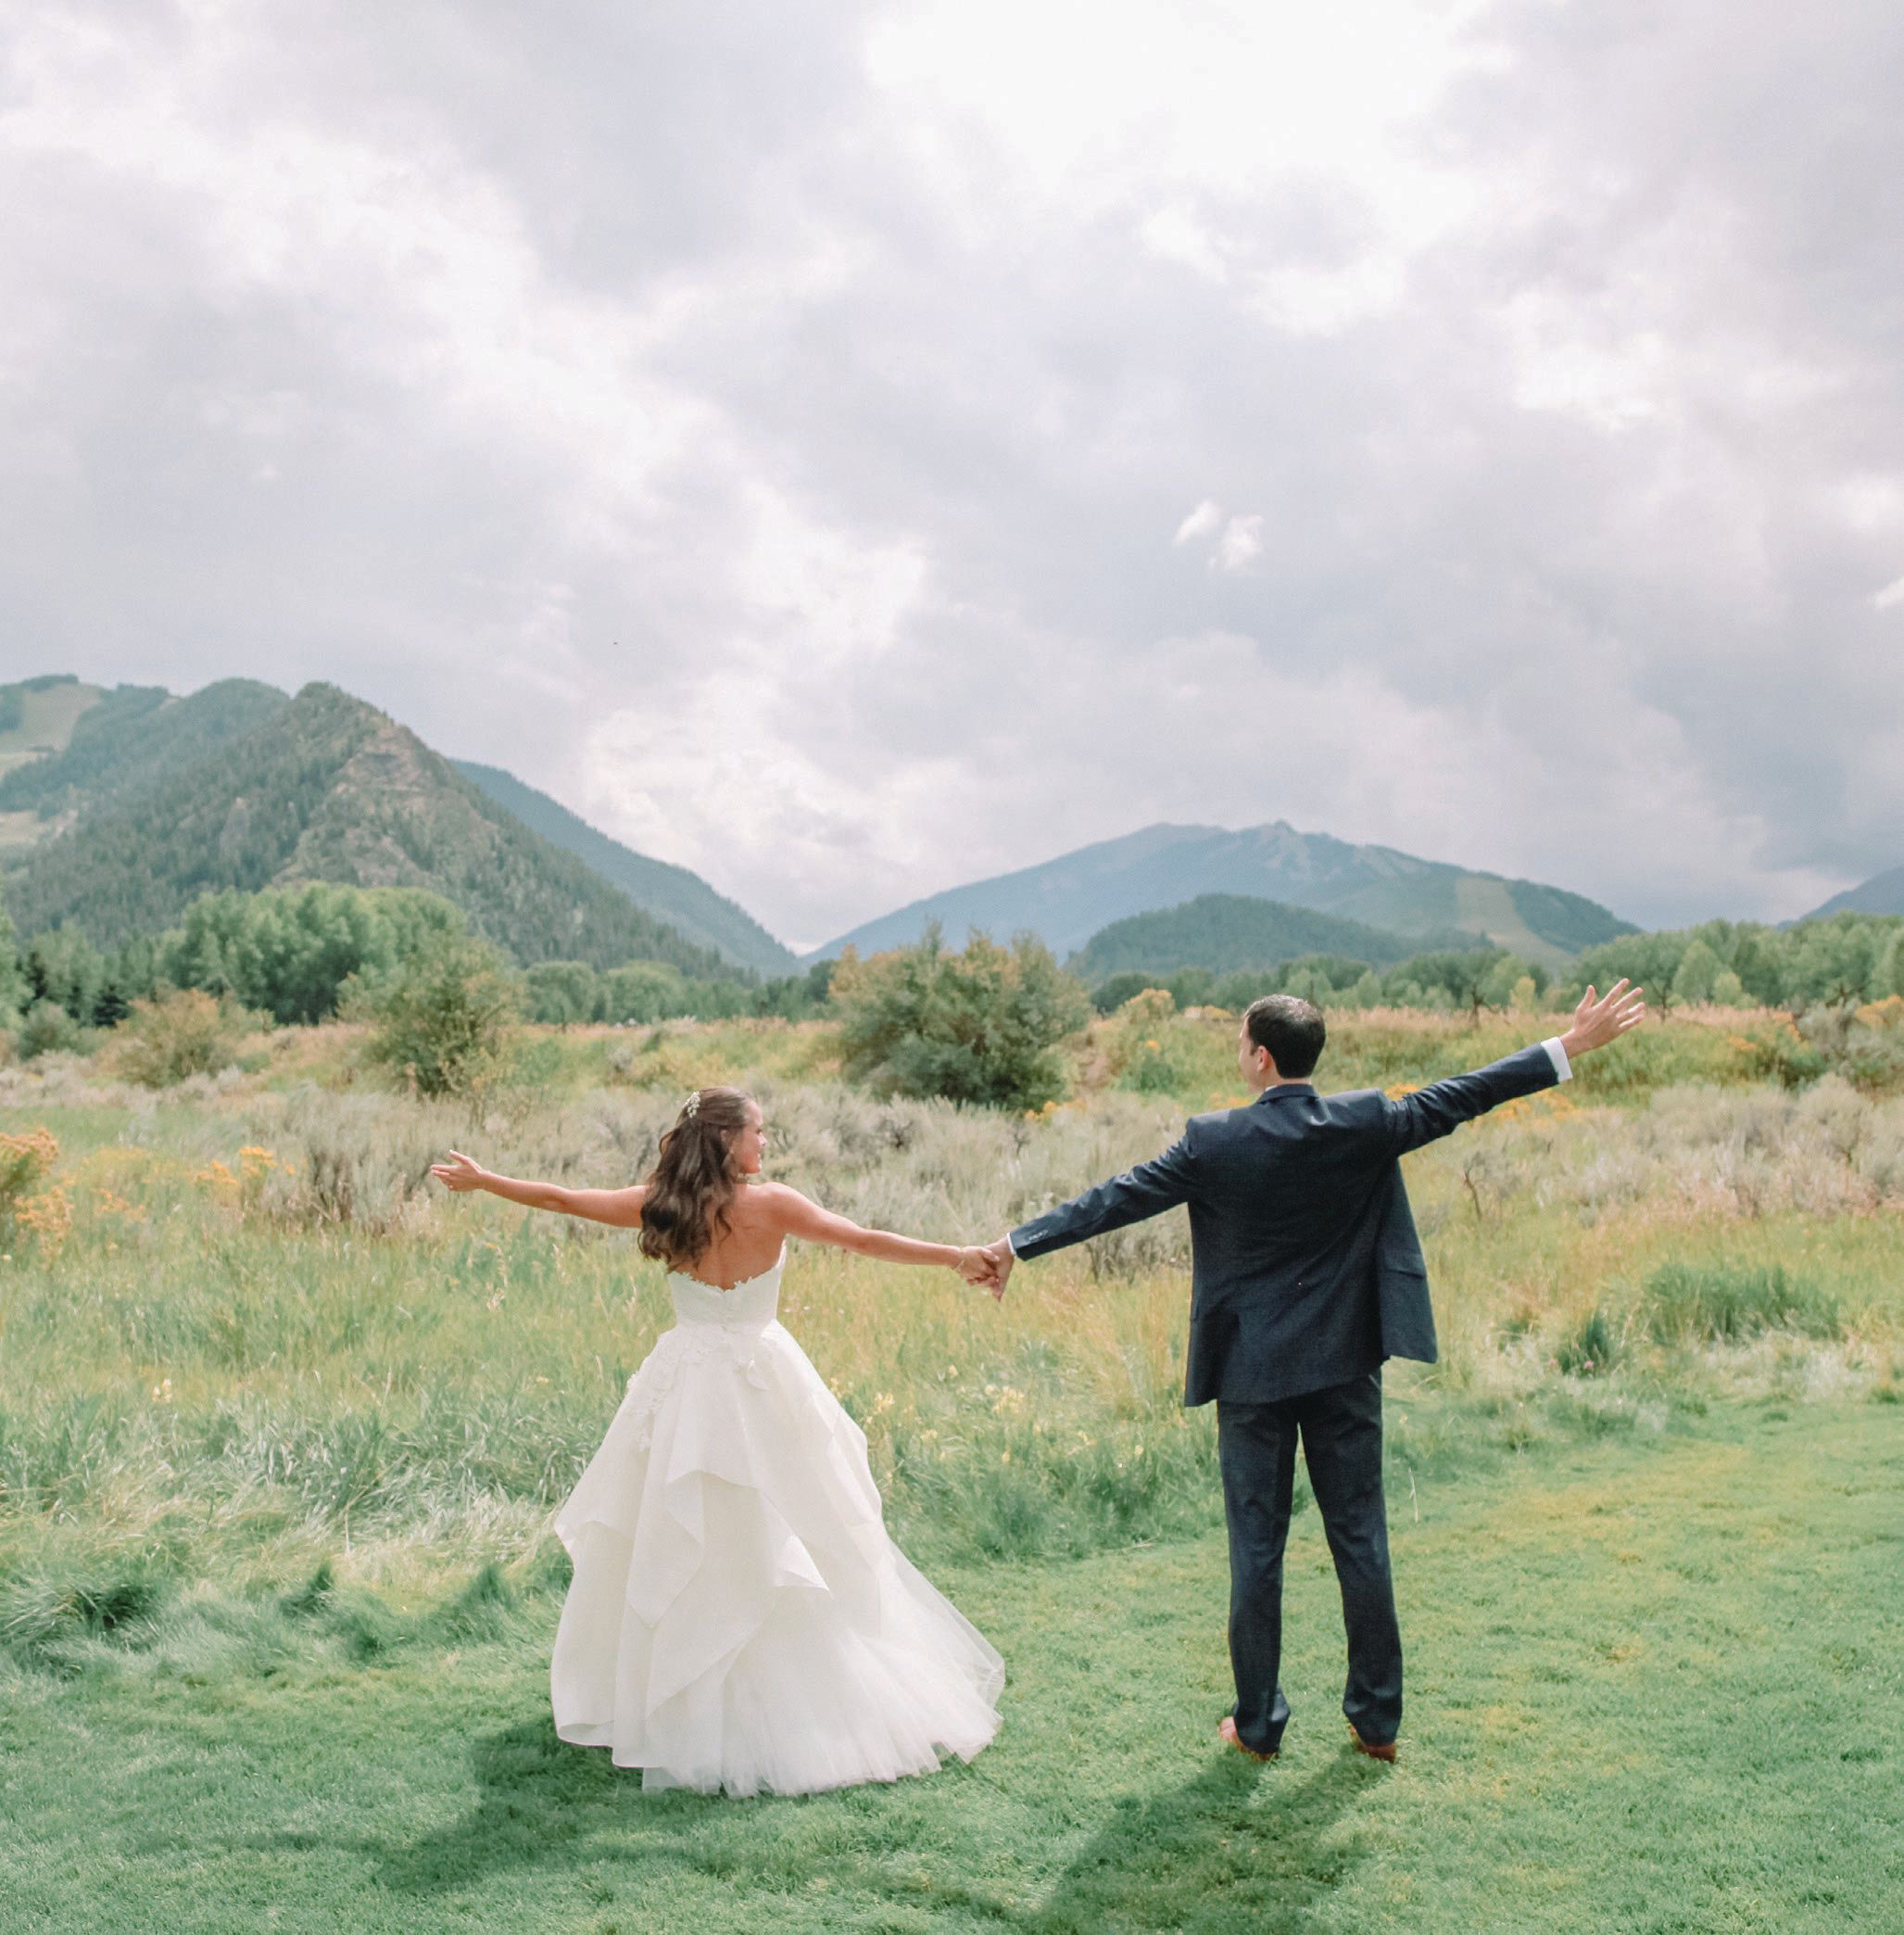 Aspen Meadows Resort is the ultimate venue for your outdoor wedding dreams—complete with the McNulty Ballroom and Albright Pavilion. PHOTO COURTESY OF ASPEN MEADOWS RESORT